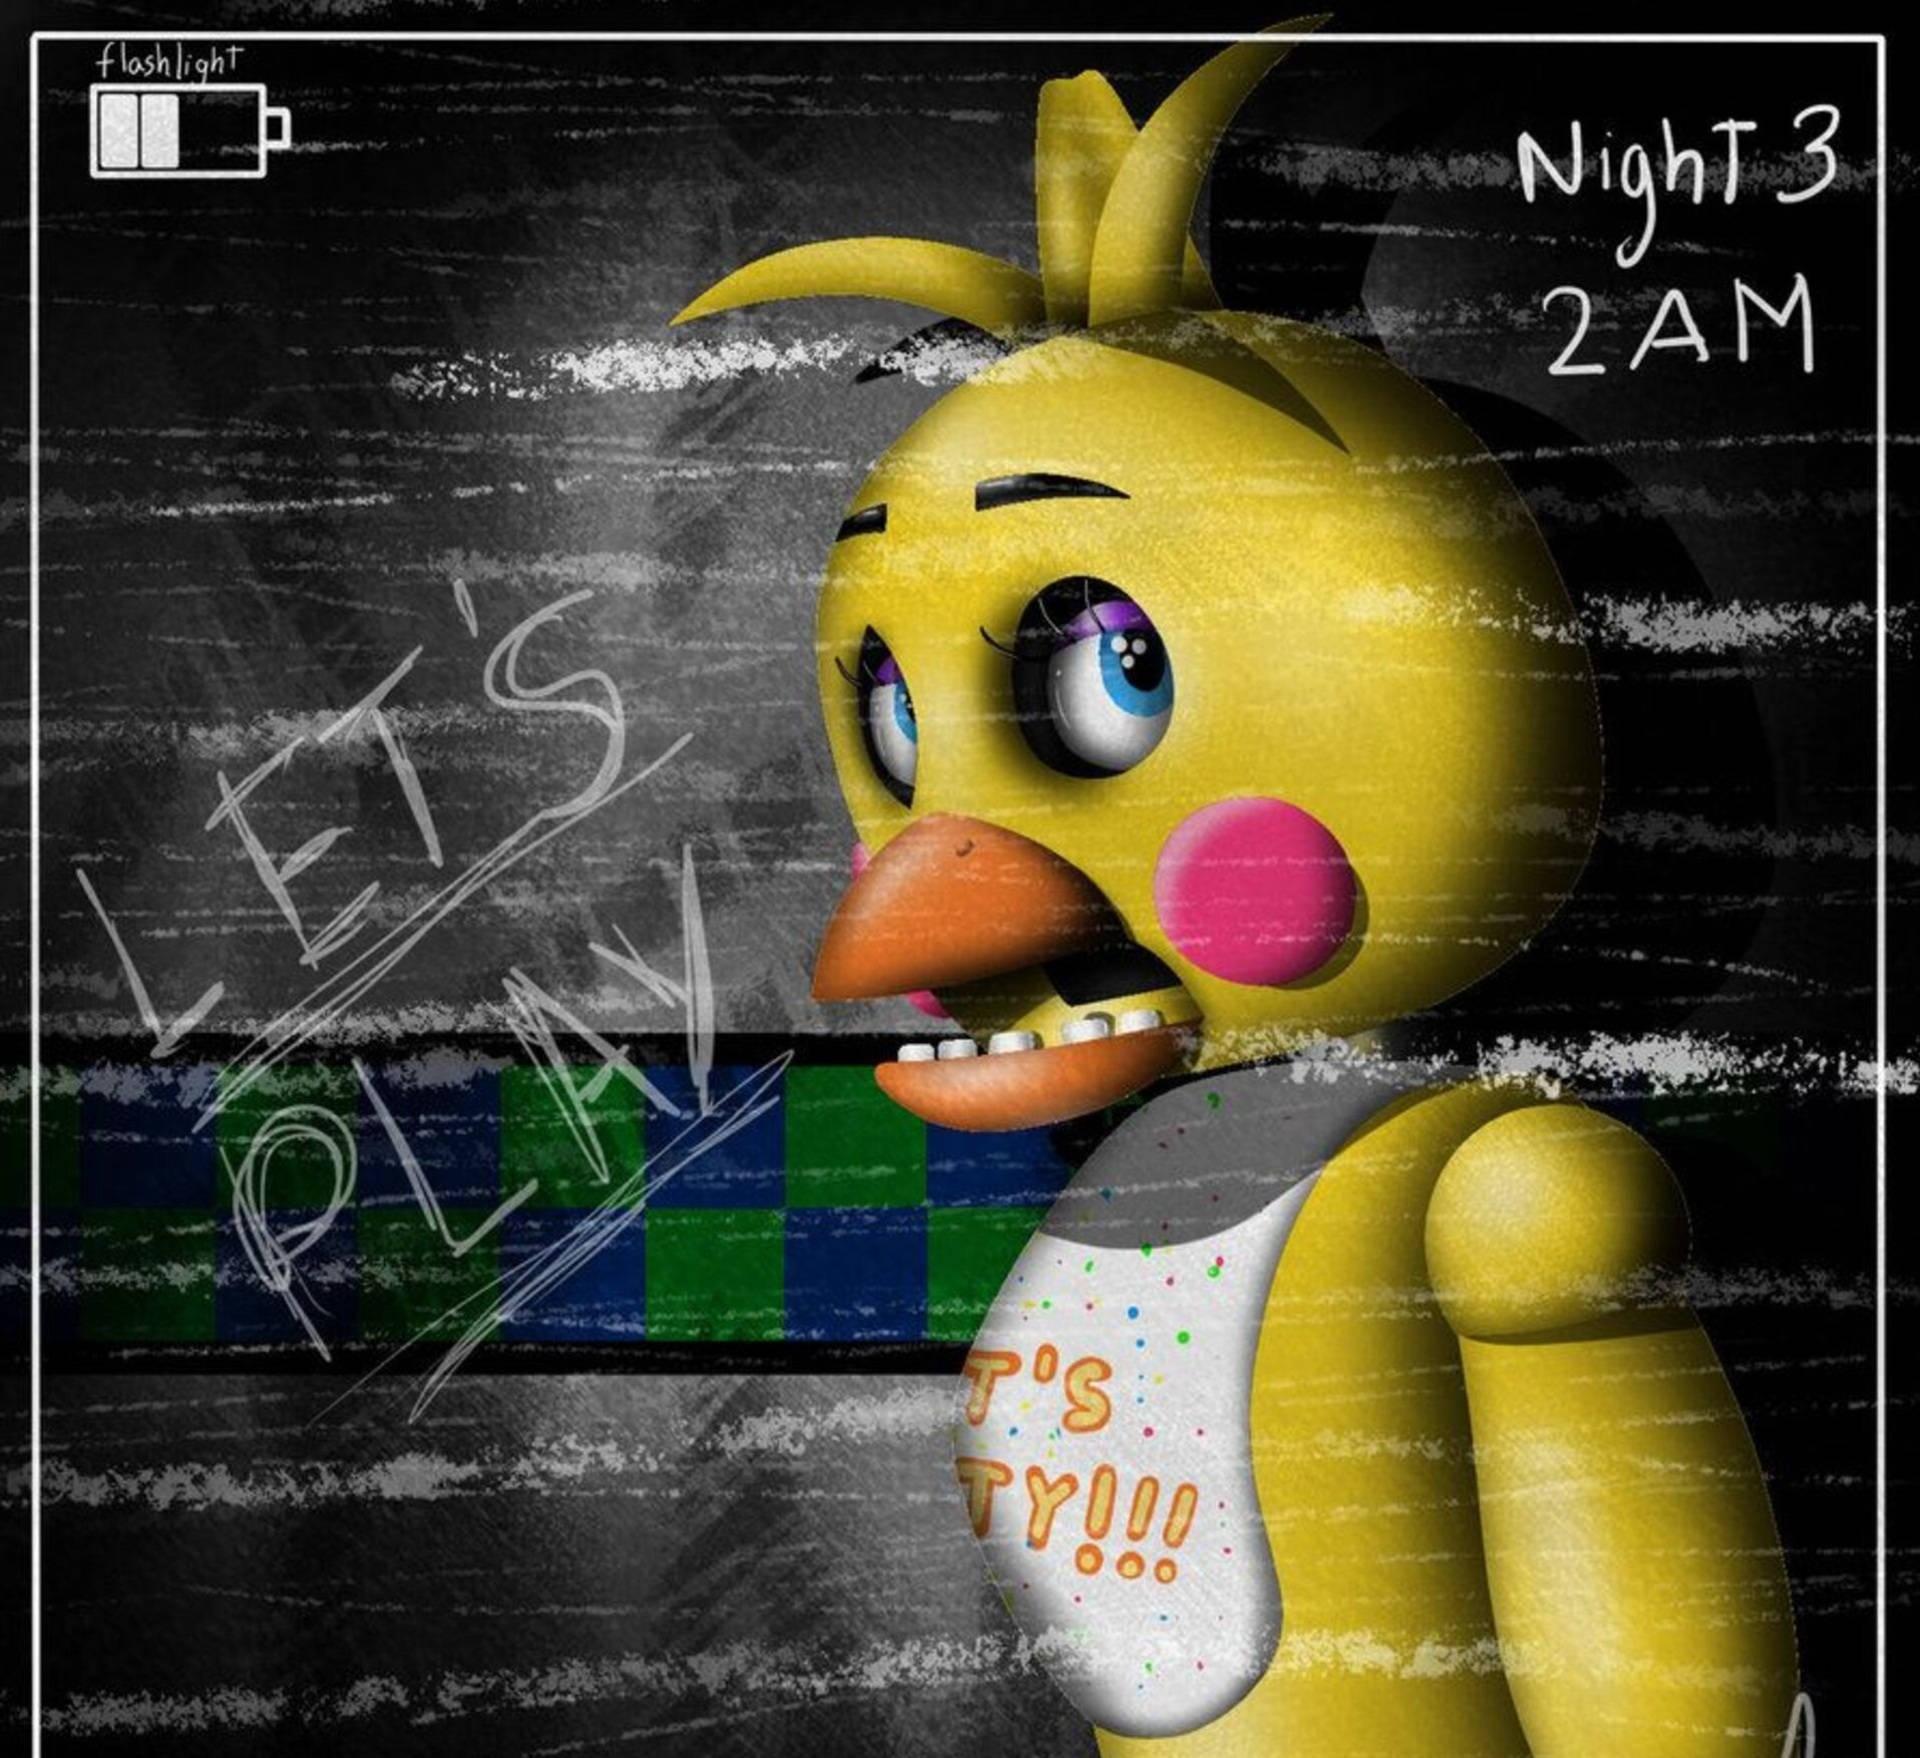 Creepy Fnaf Chica Let's Play